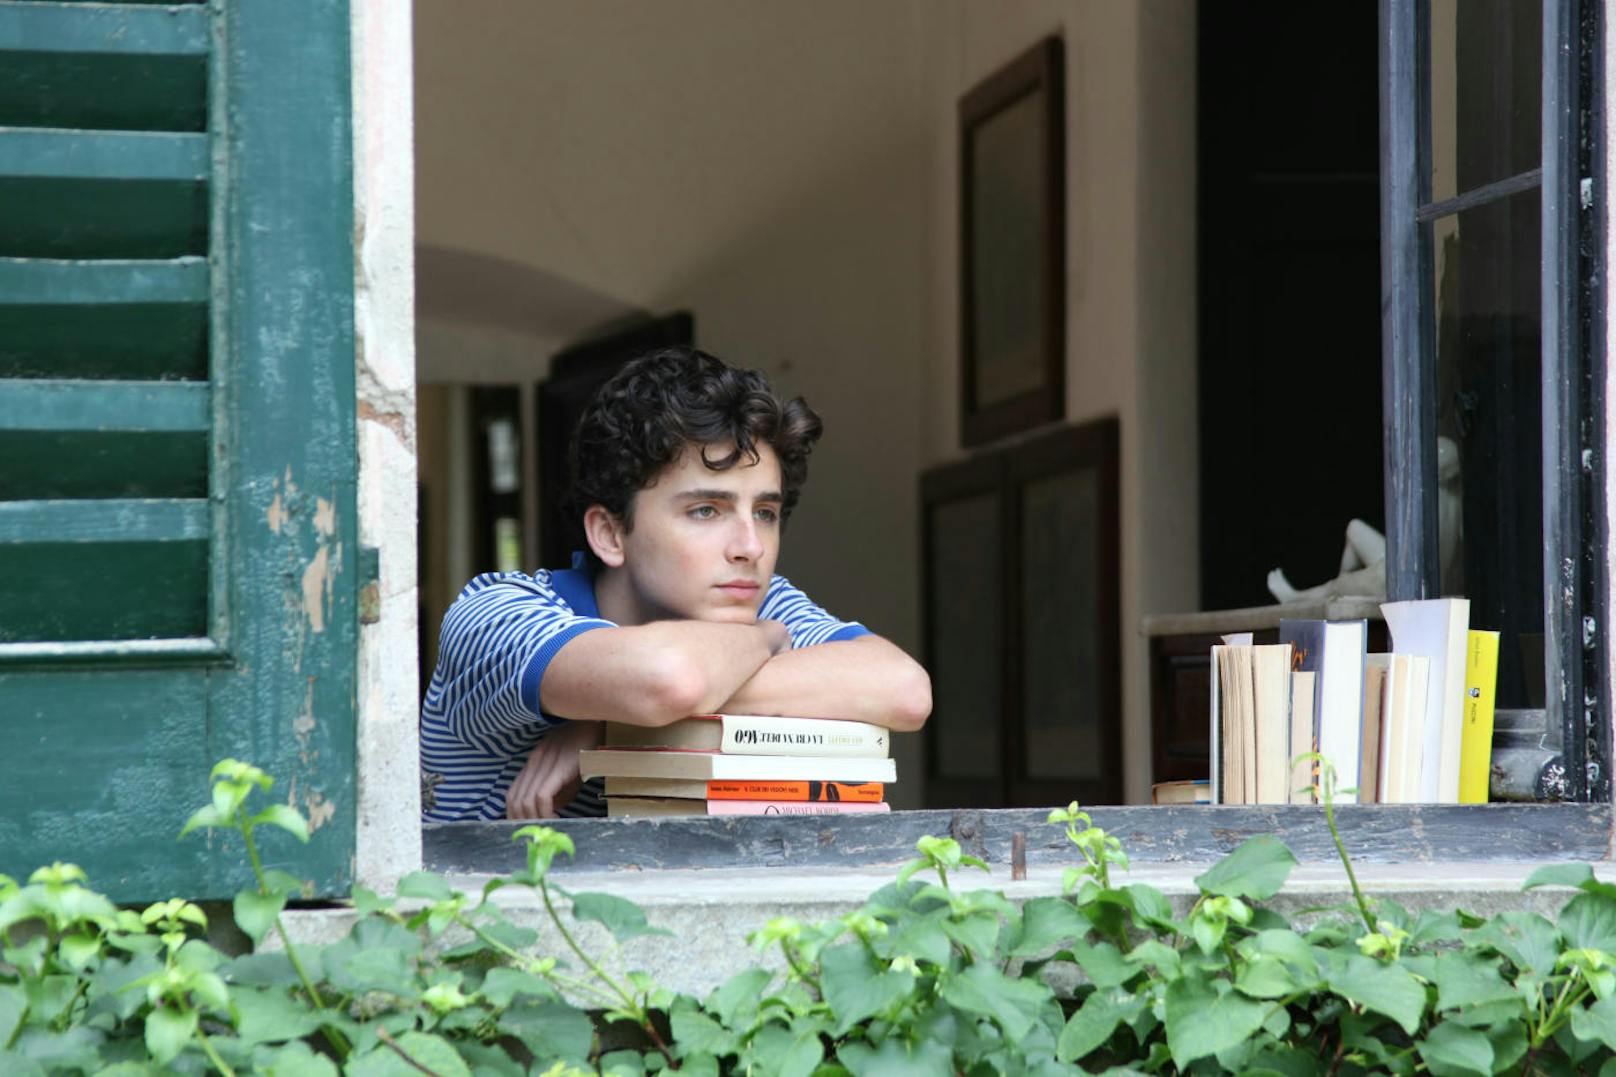 Timothée in "Call Me By Your Name"